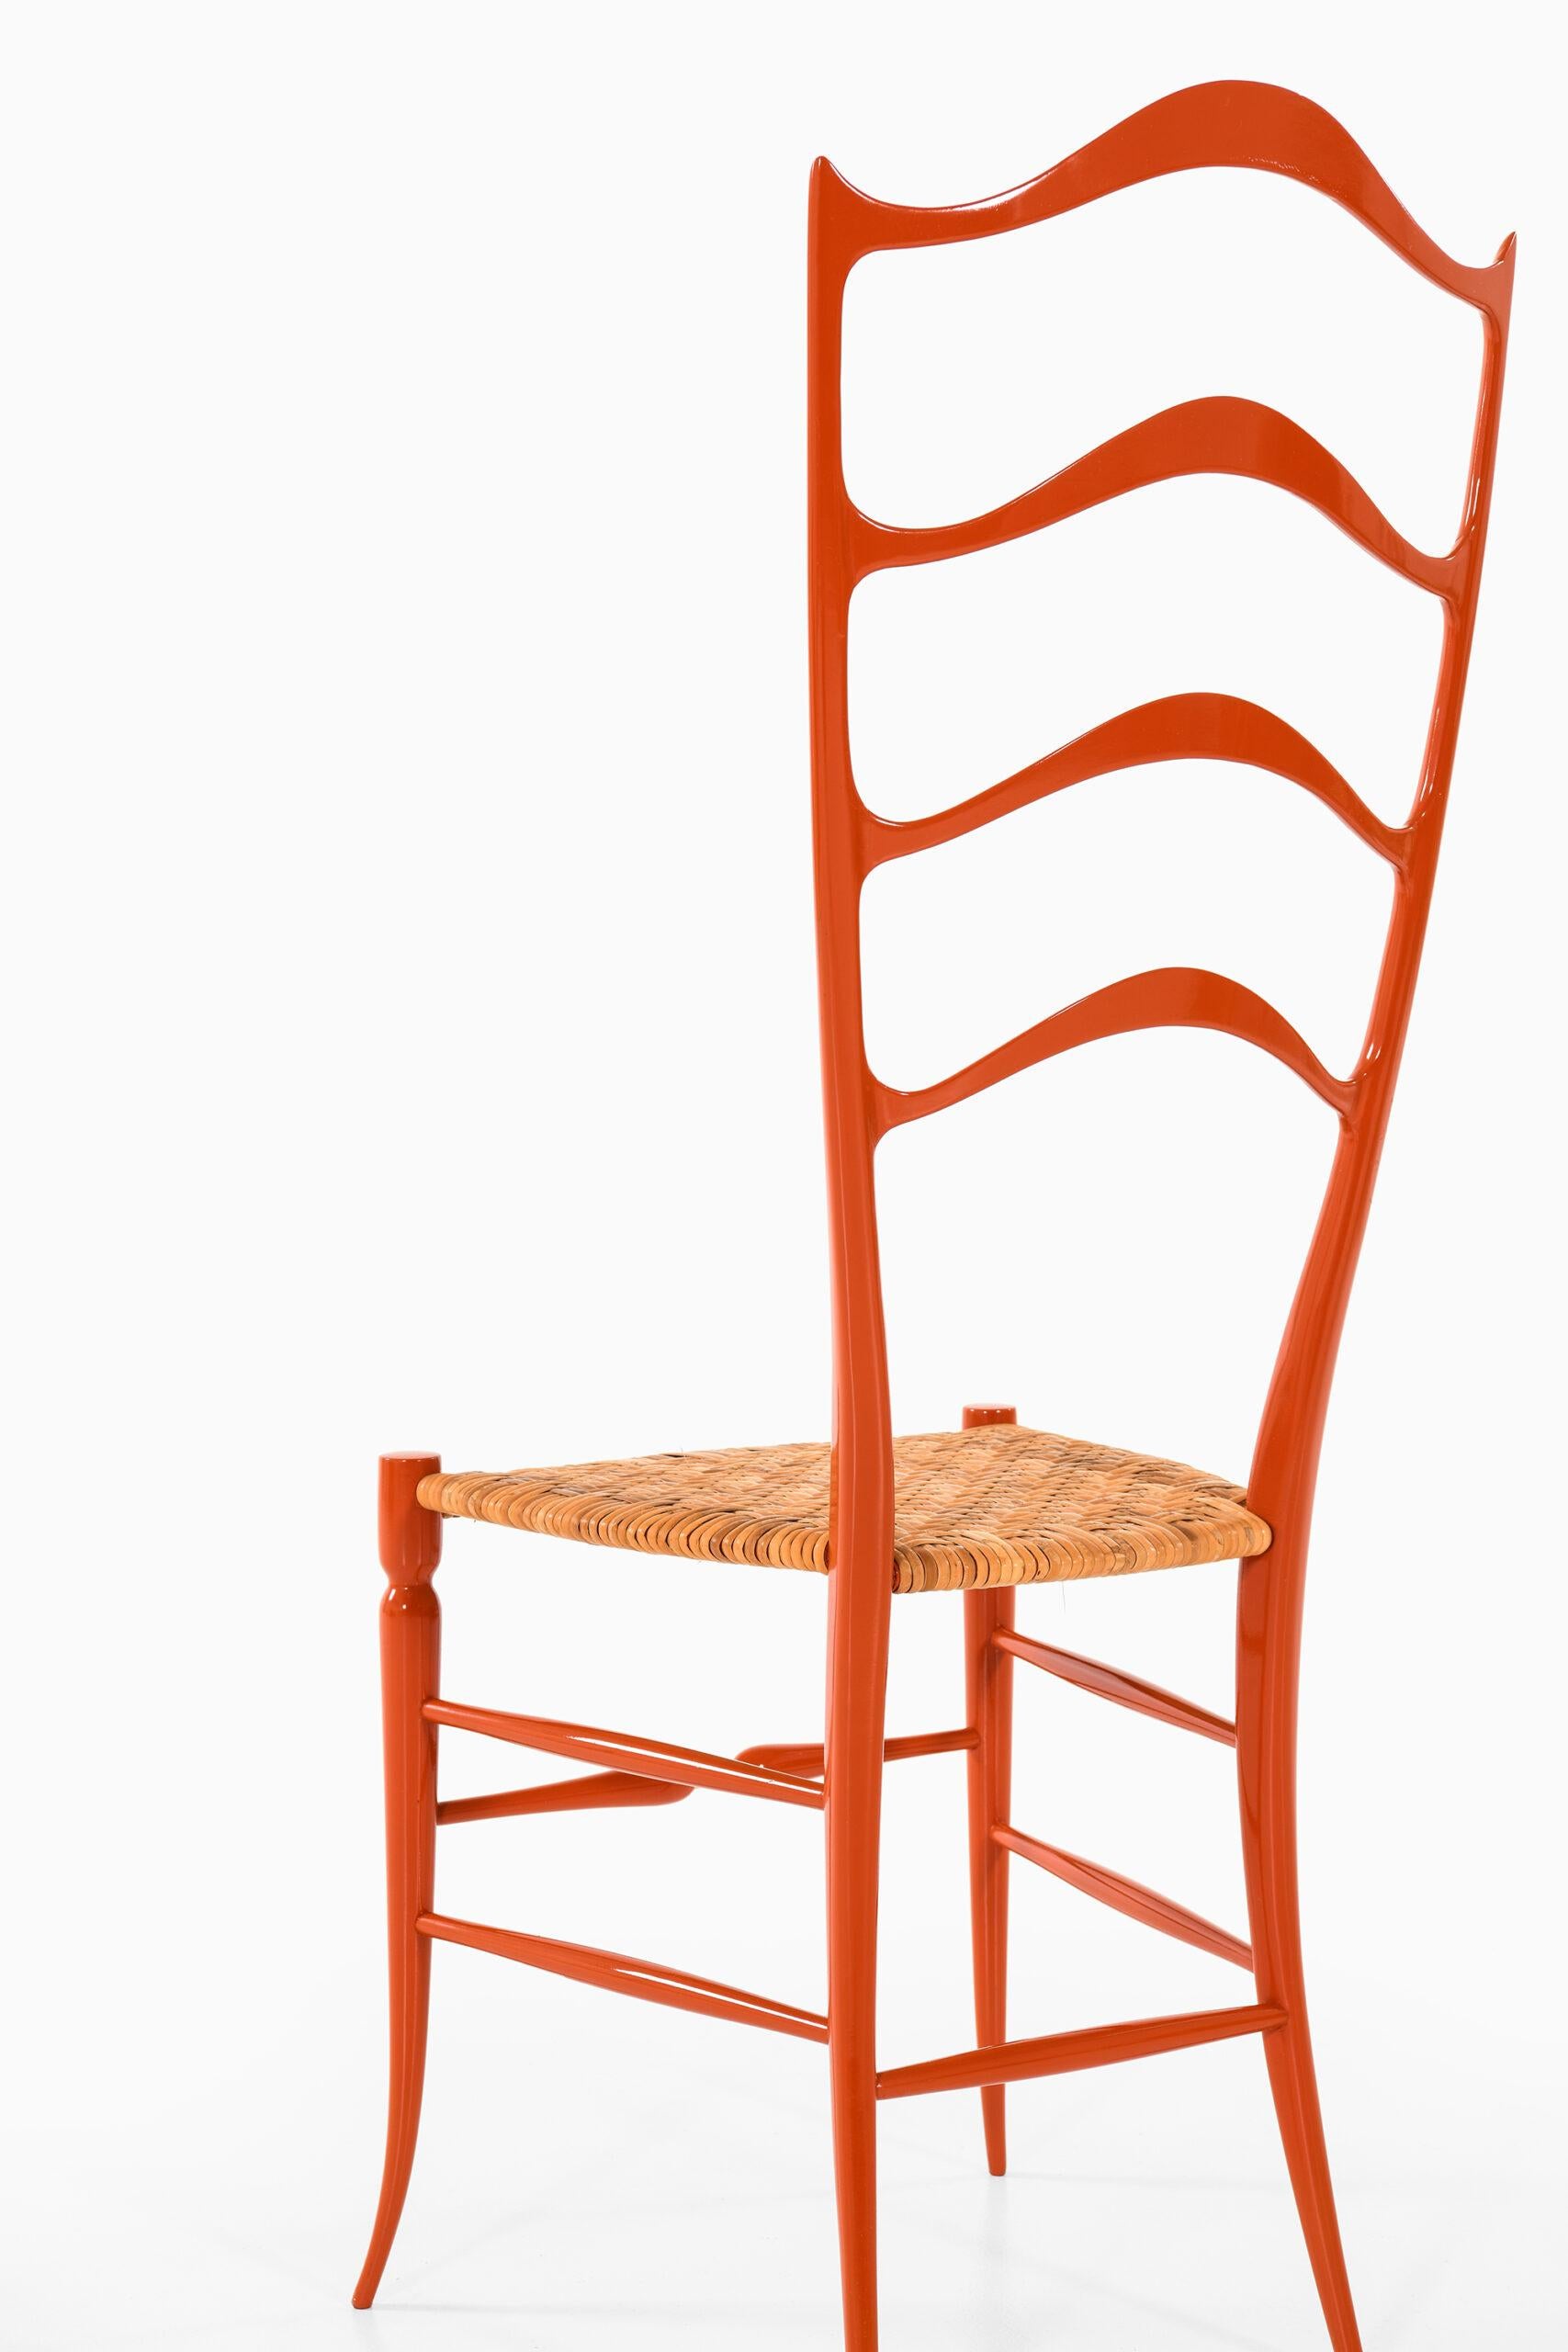 Cane Side Chair Probably Produced by Chiavari in Italy